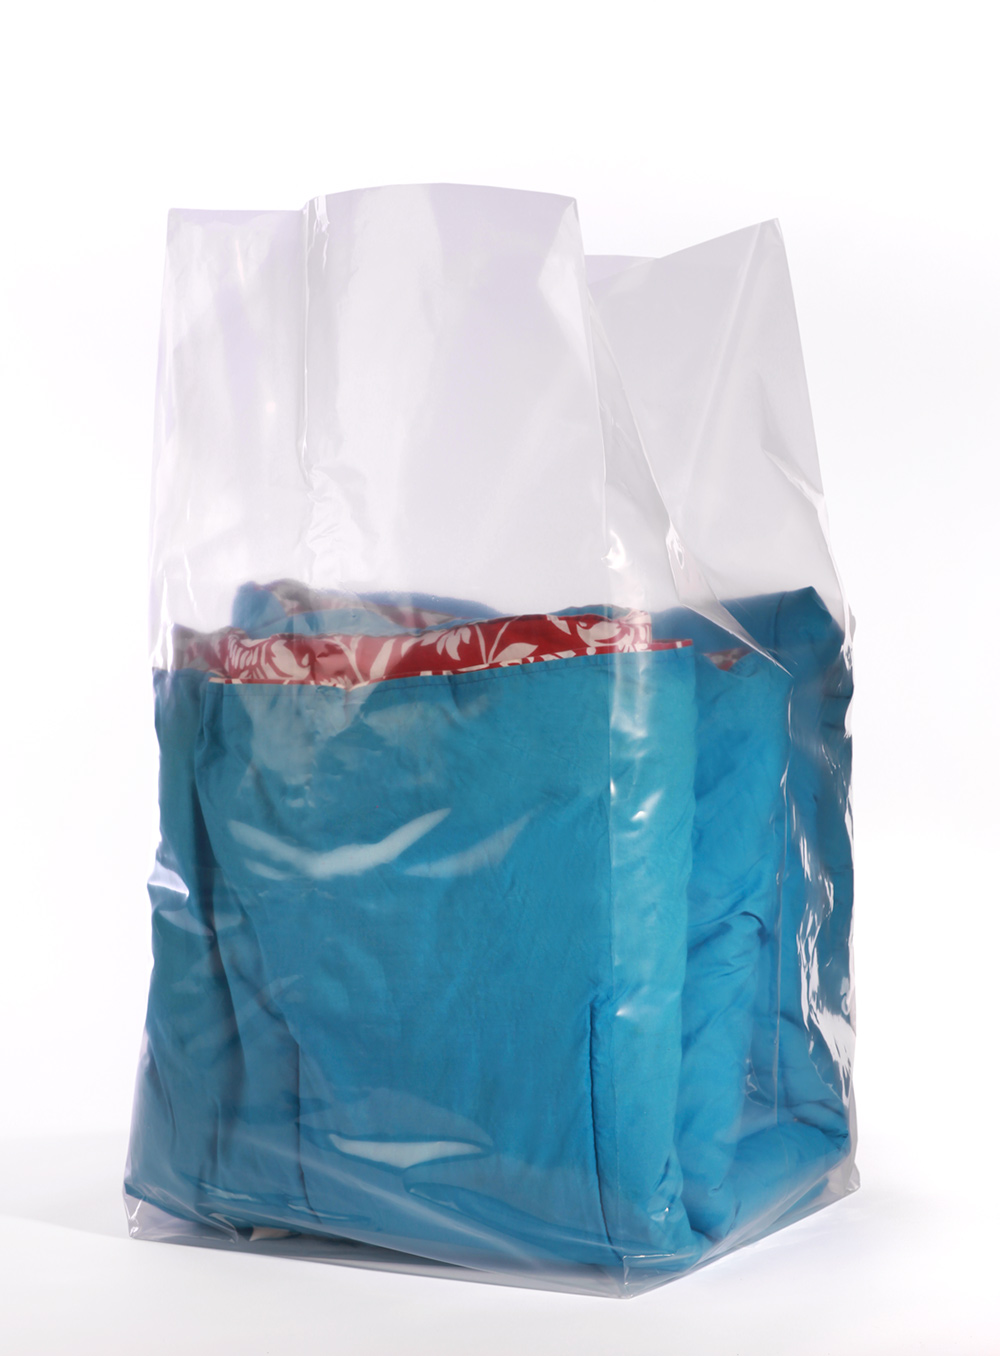 1.5 MIL Gusseted Poly Bags